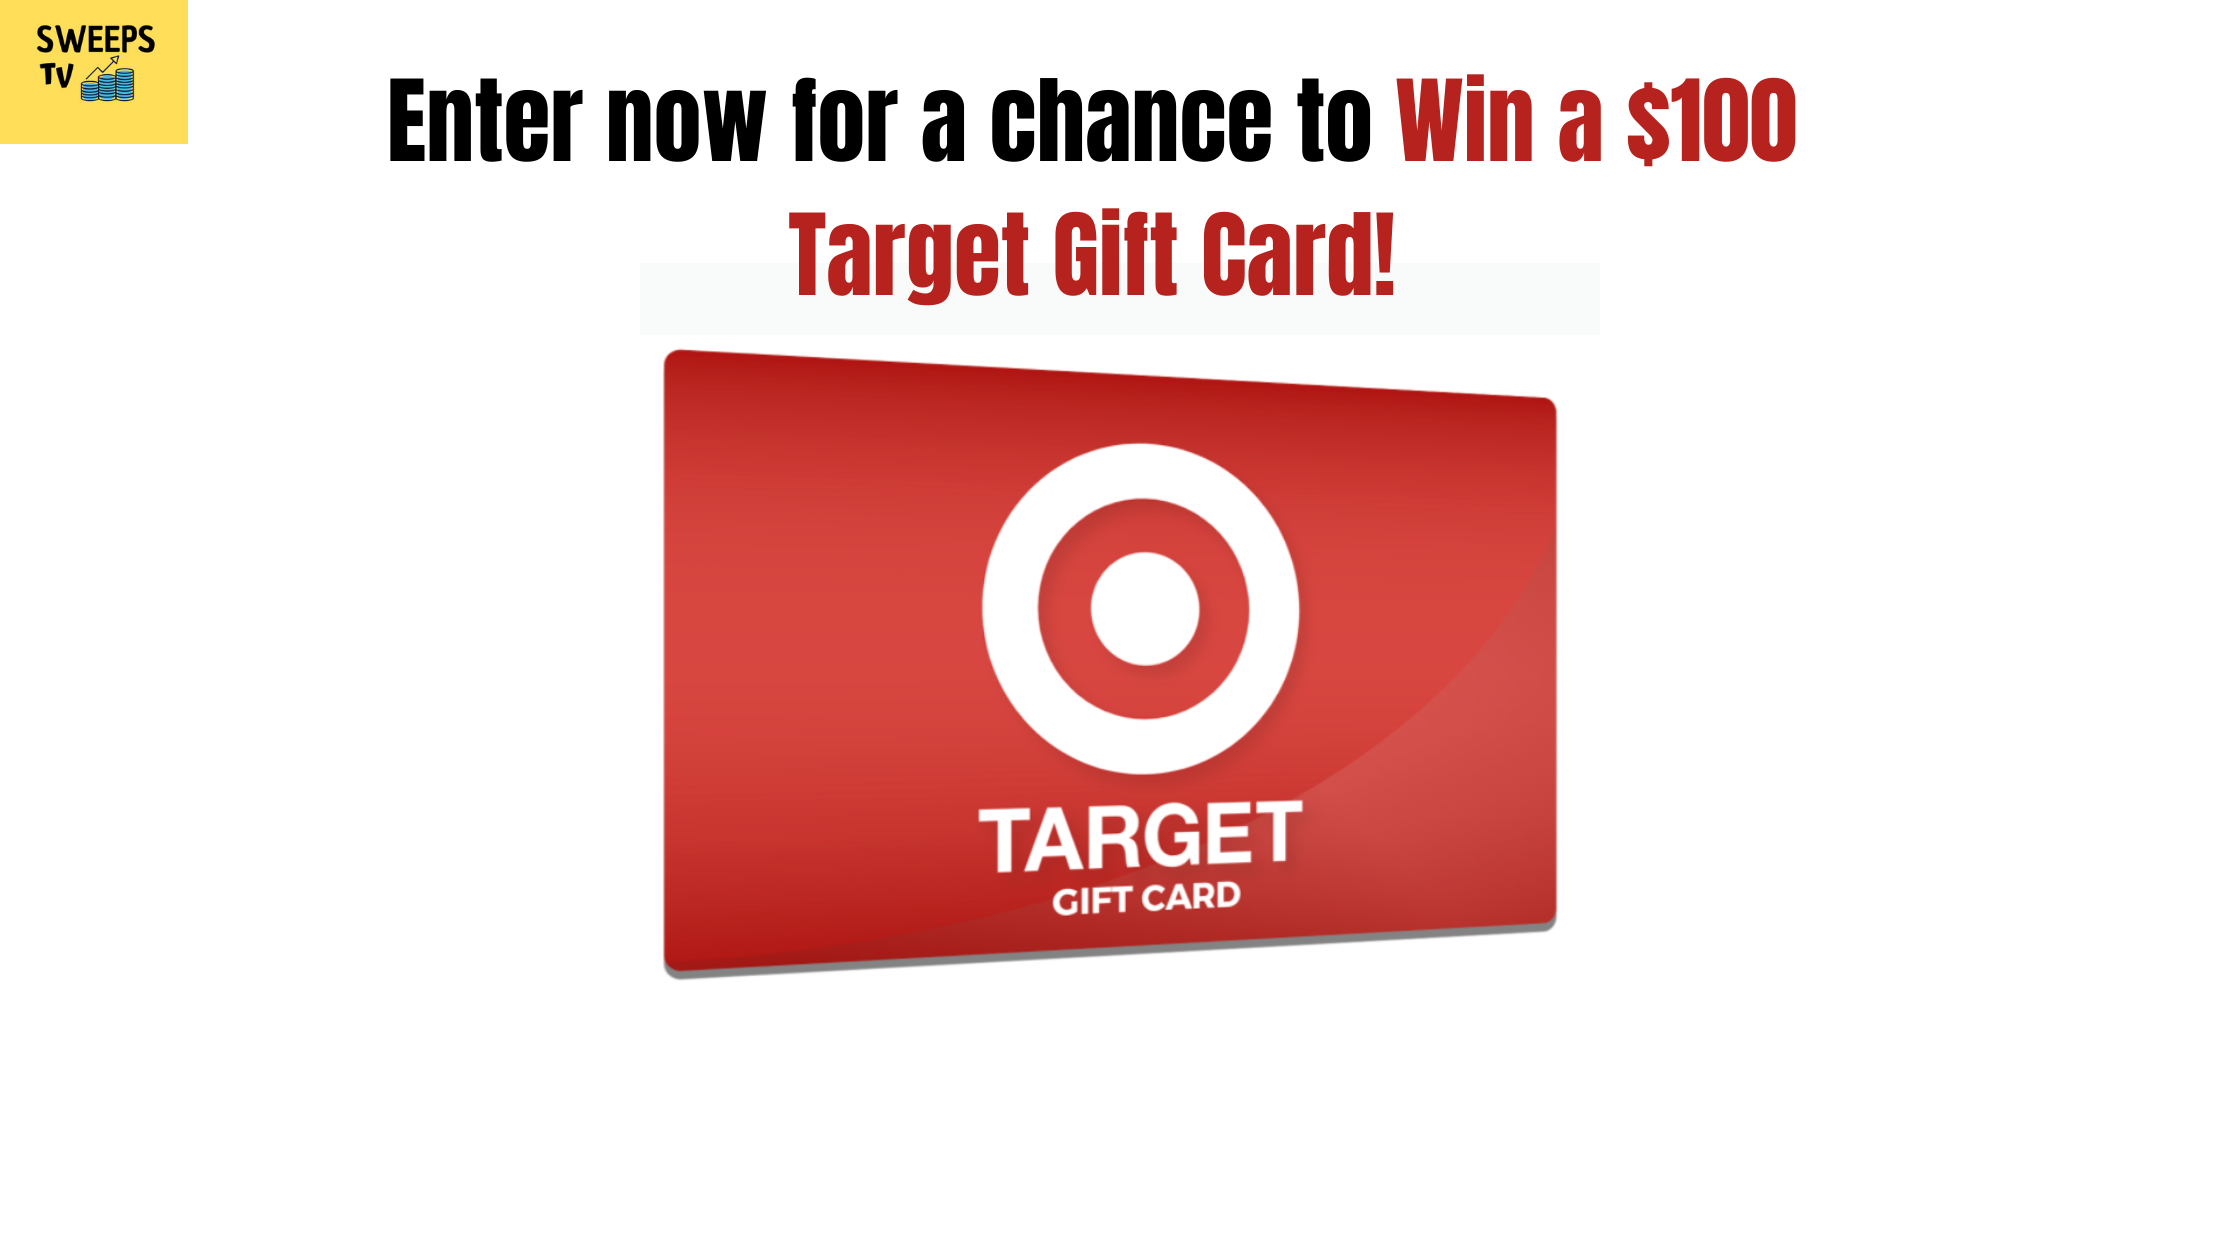 Sweepstakes to Win a $100 Target Gift Card!